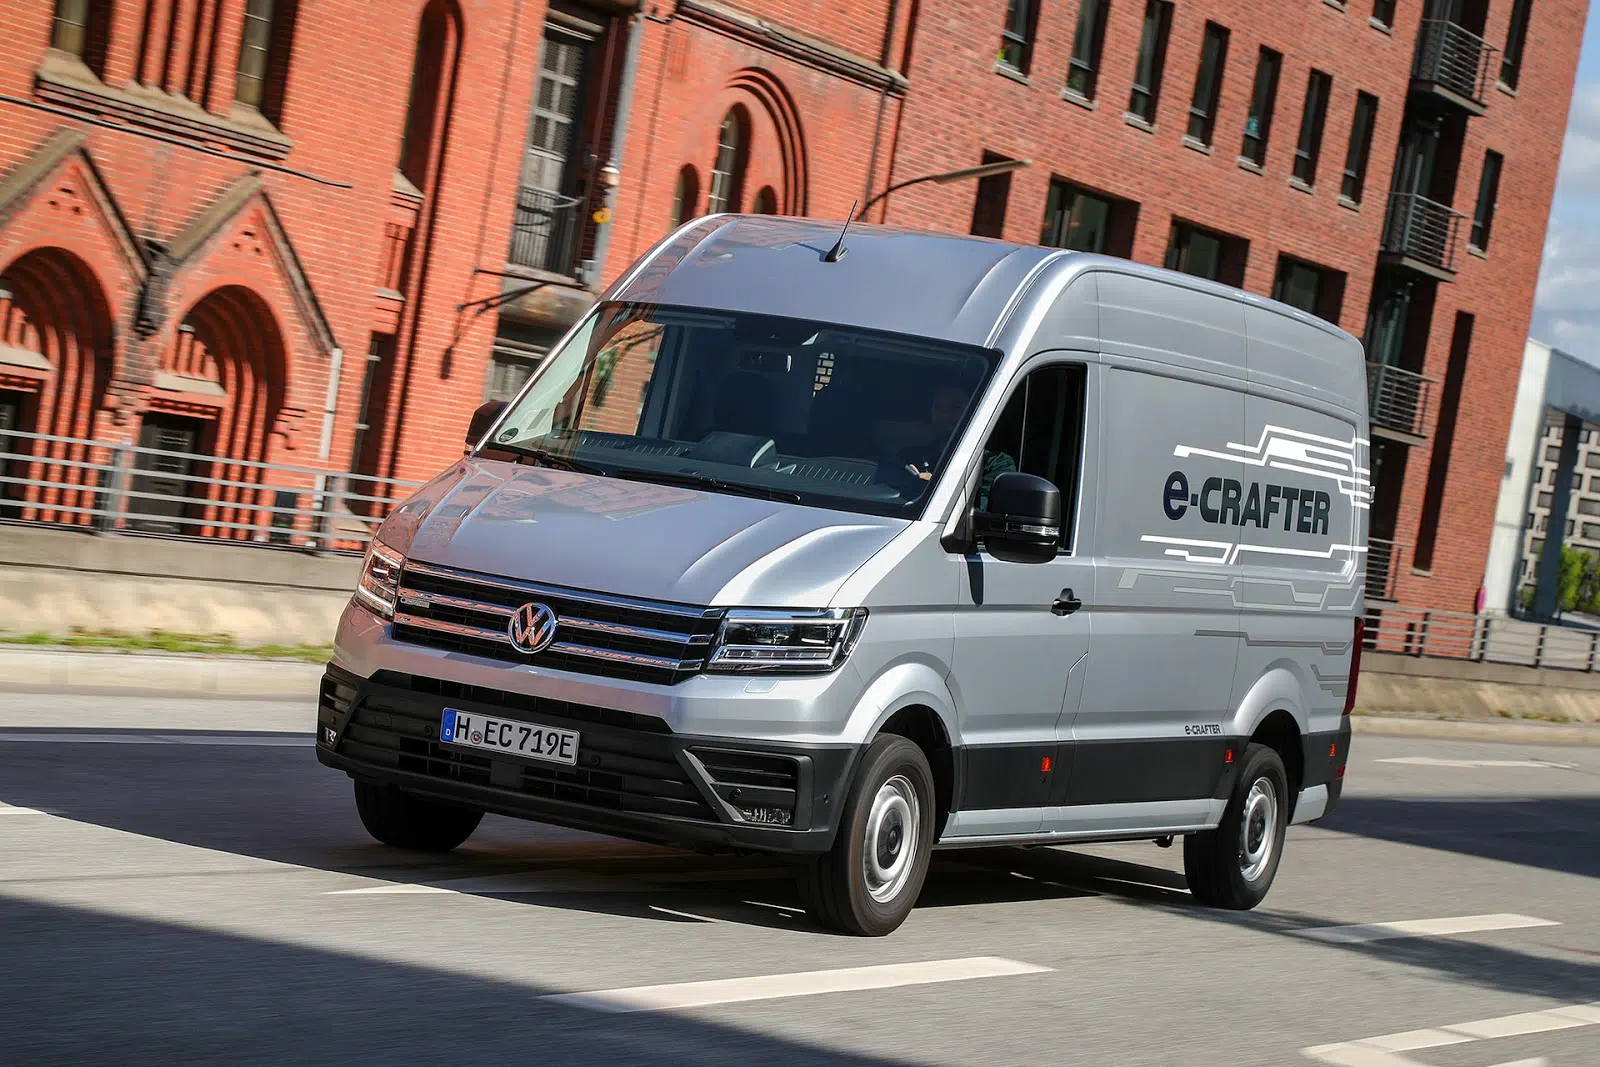 Volkswagen2Be Crafter 1 1 The new Volkswagen e-Crafter, now available in Greece